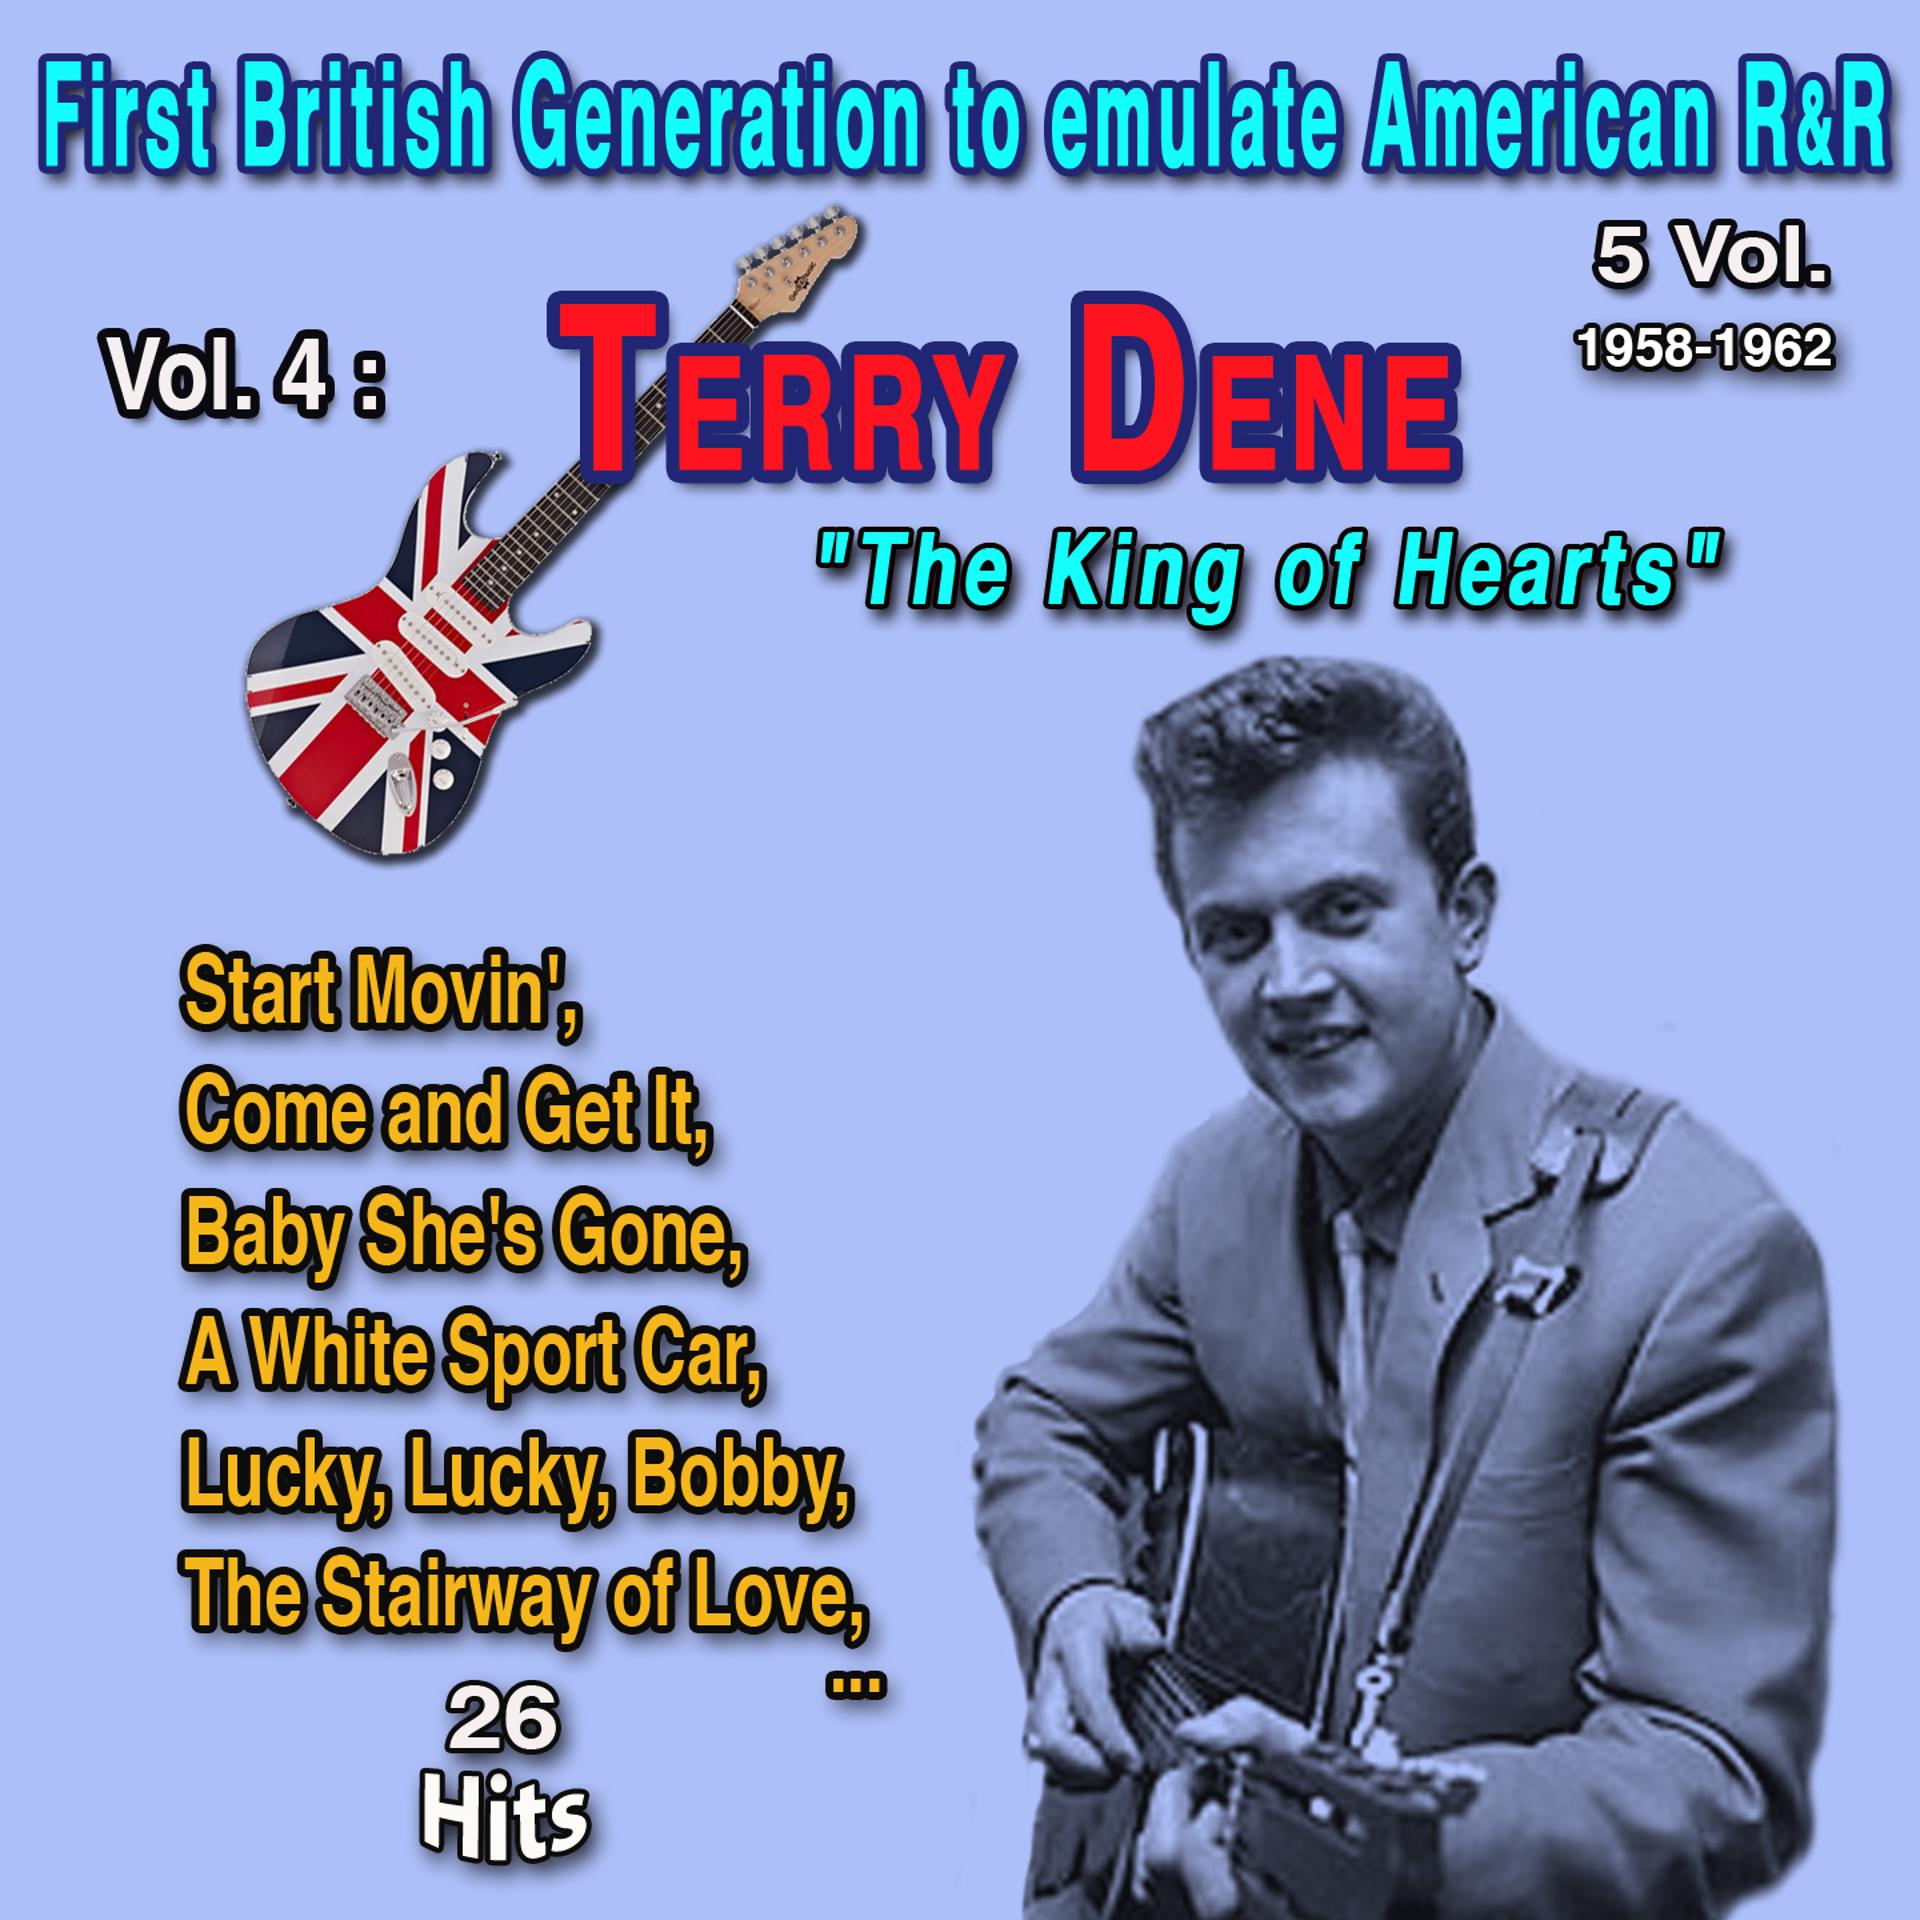 Постер альбома First British Generatio to emulate American Rock and Roll 5 Vol. - 1958-1962 Vol. 4 : Terry Dene "The King of Hearts""